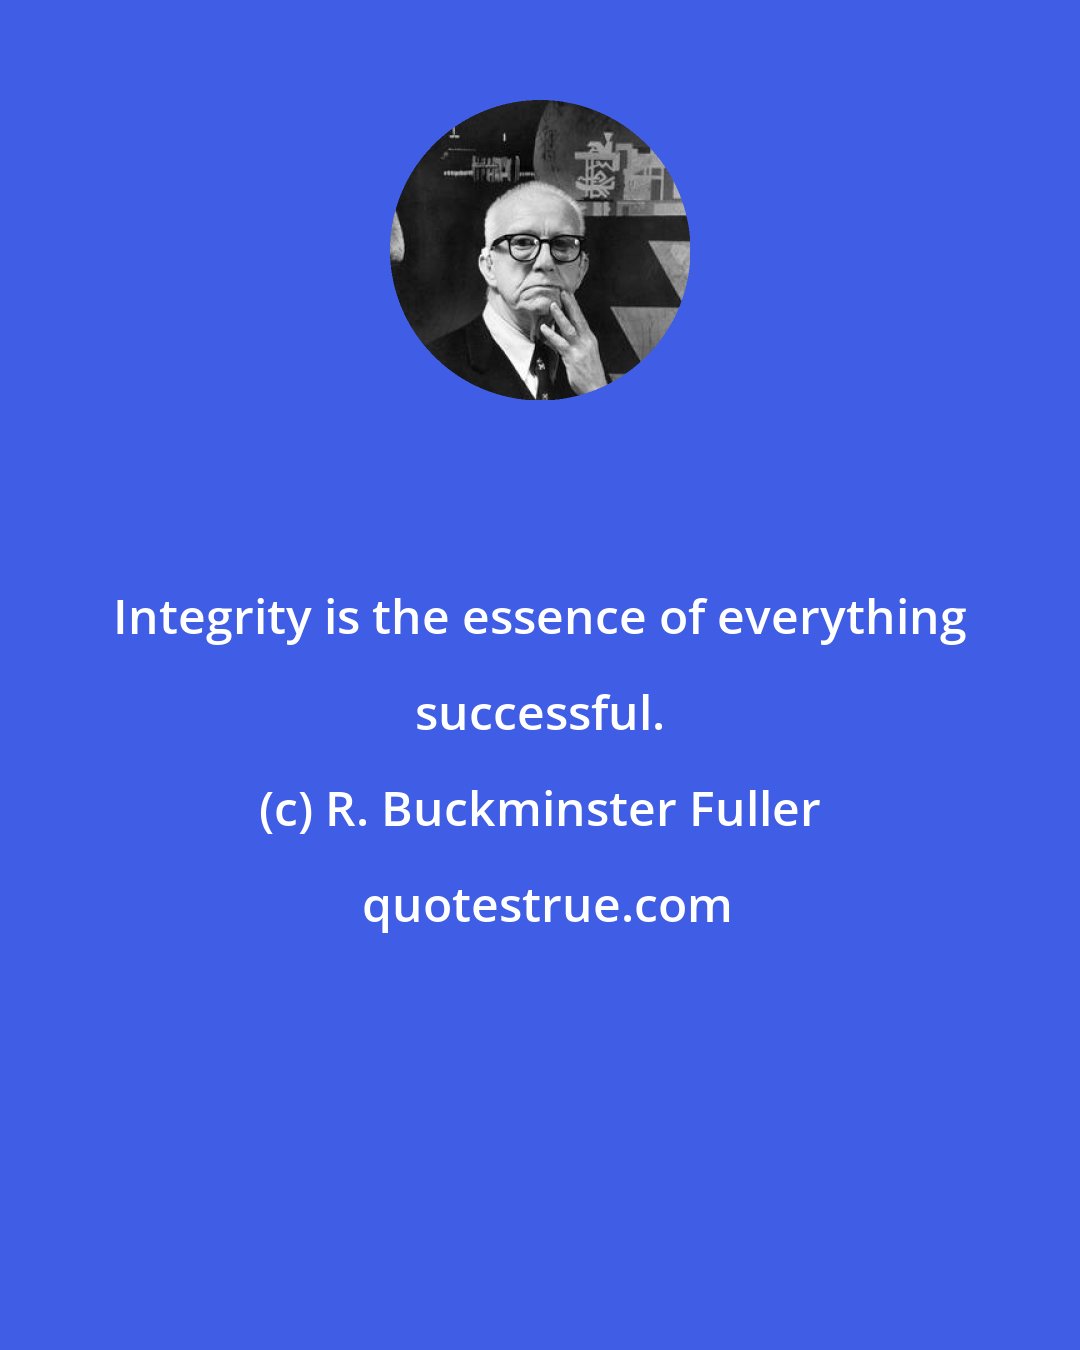 R. Buckminster Fuller: Integrity is the essence of everything successful.